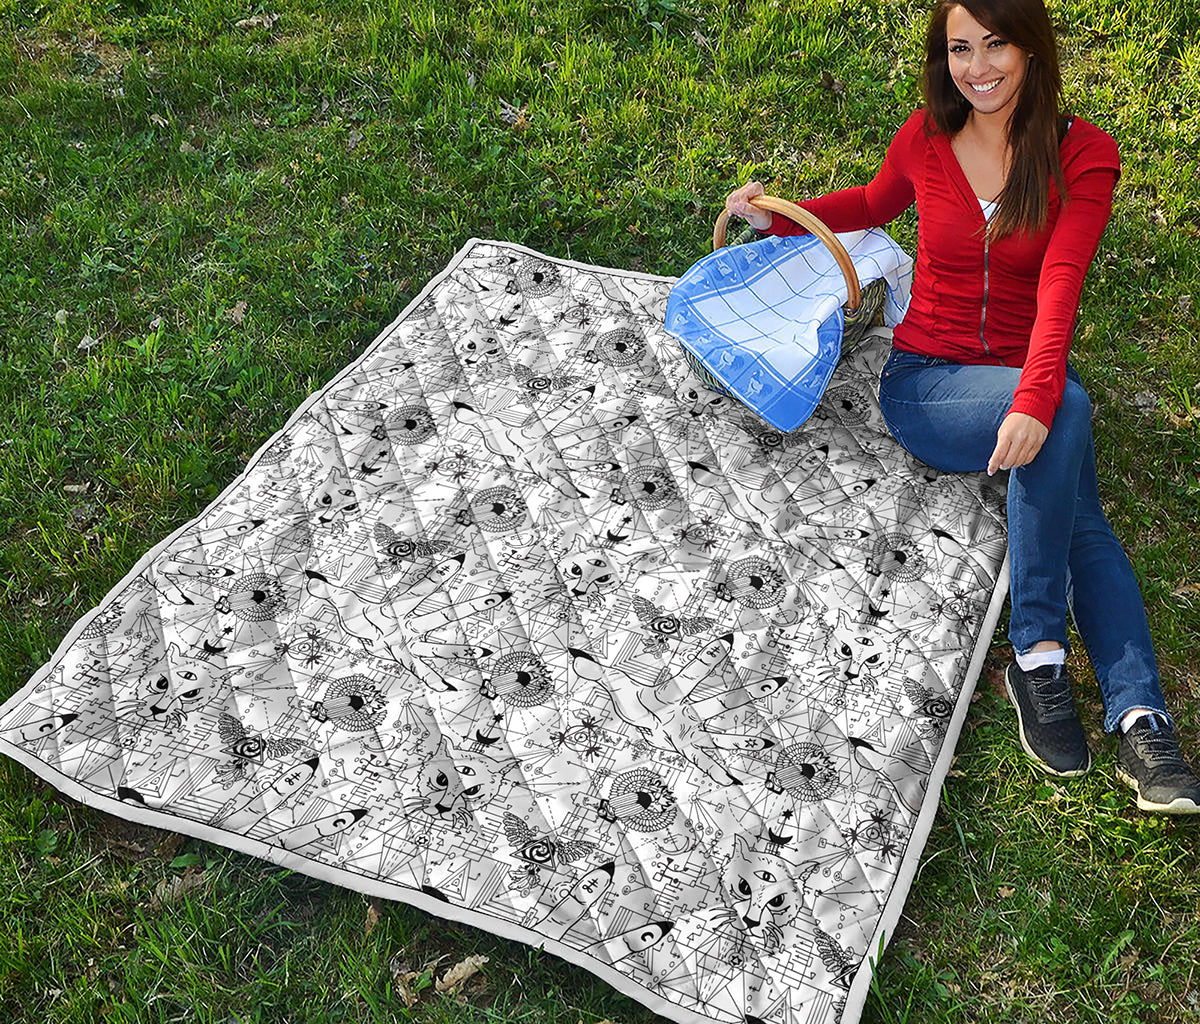 White And Black Wicca Magical Print Quilt